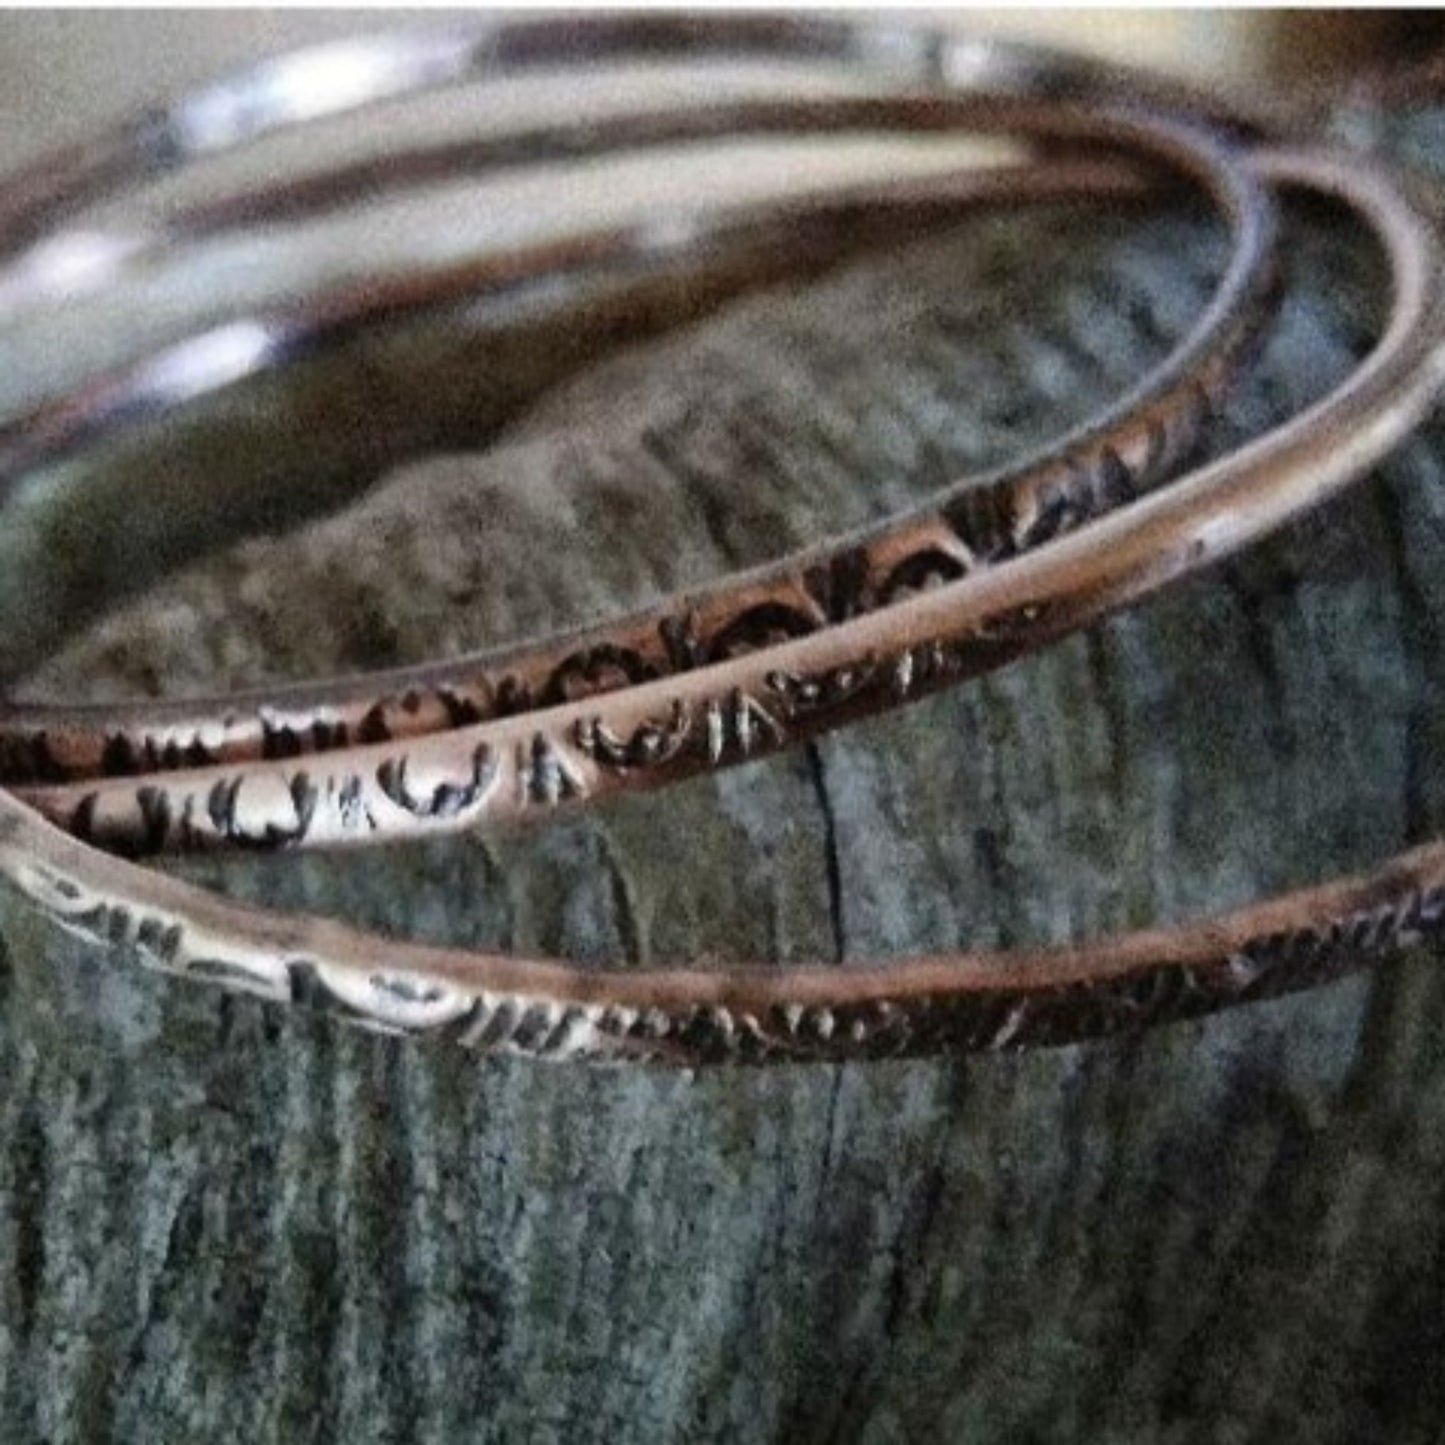 Copper Bangles Hand stamped, forged | WRD - WarmRainyDay